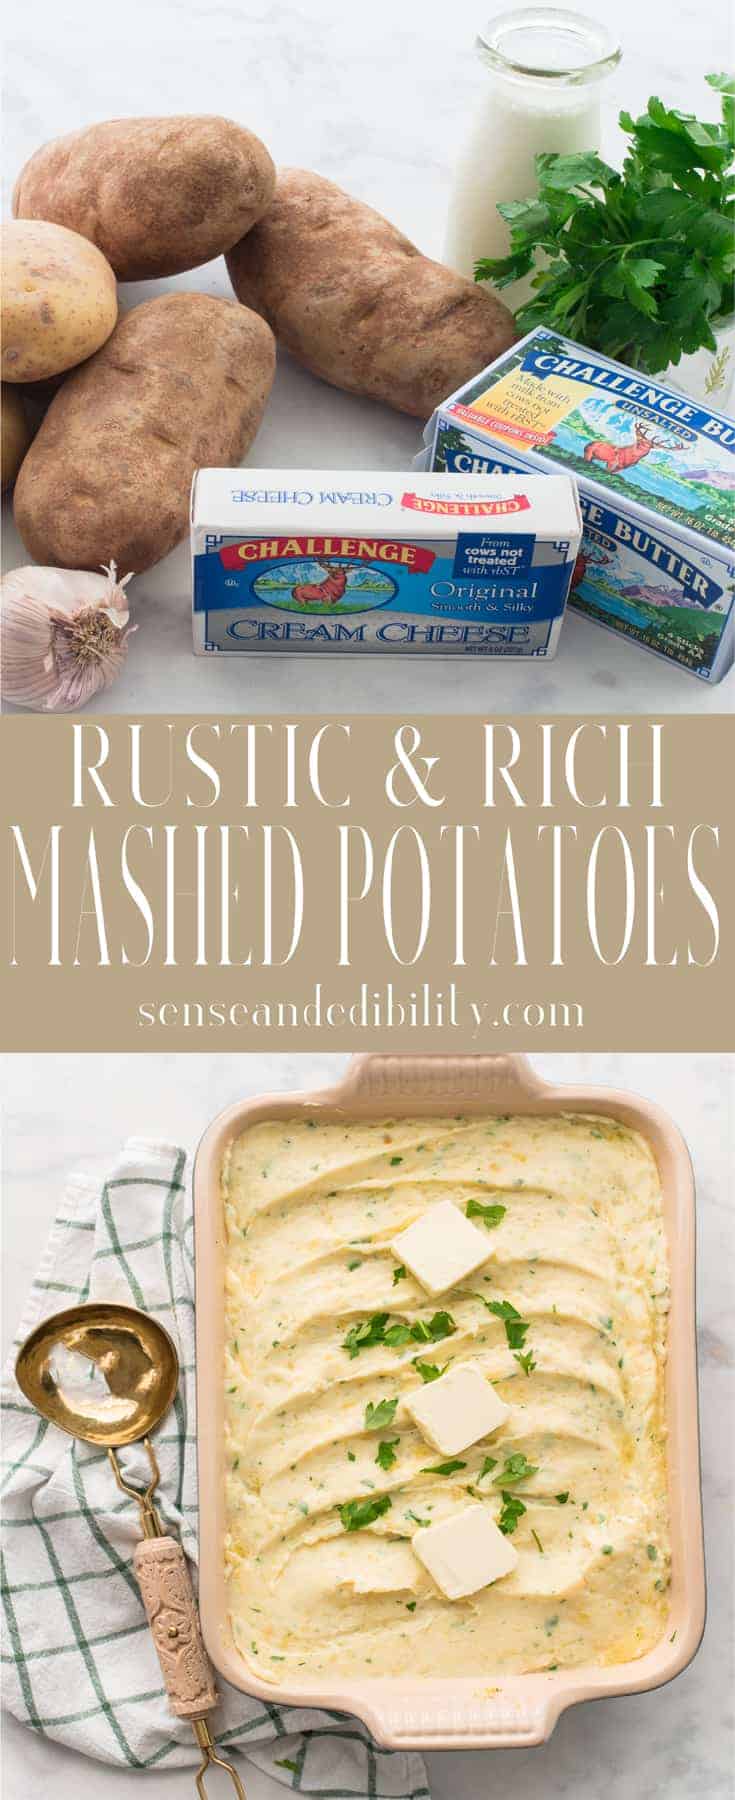 Rustic & Rich Mashed Potatoes are freezer- and make-ahead friendly. Prepare them for all of your upcoming holiday dinners #mashedpotatoes #rusticmashedpotatoes #richmashedpotatoes #potato #sidedishes #thanksgivingsides #holidaysides #christmassides #dinner #accompaniments #holidaysidedishes #creamypotatoes #lumpypotatoes #makeaheadsidedishes #freezerfriendlysidedishes #kidfriendly #glutenfree #vegetariansidedishes #eggfreesidedishes via @ediblesense